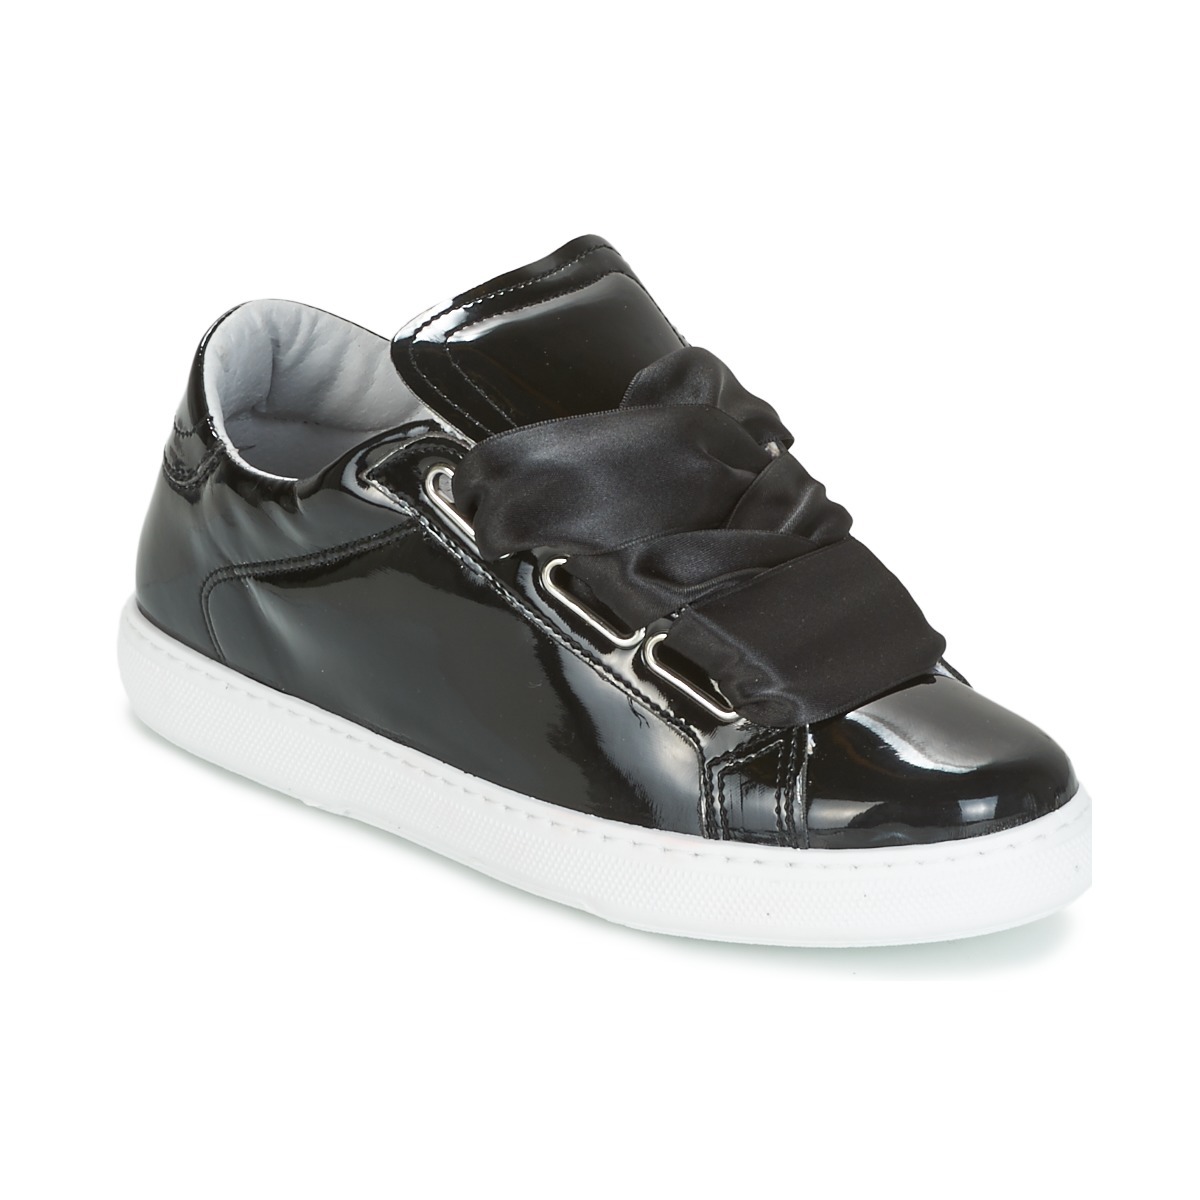 Spartoo Sneakers in Black for Woman from Yurban GOOFASH